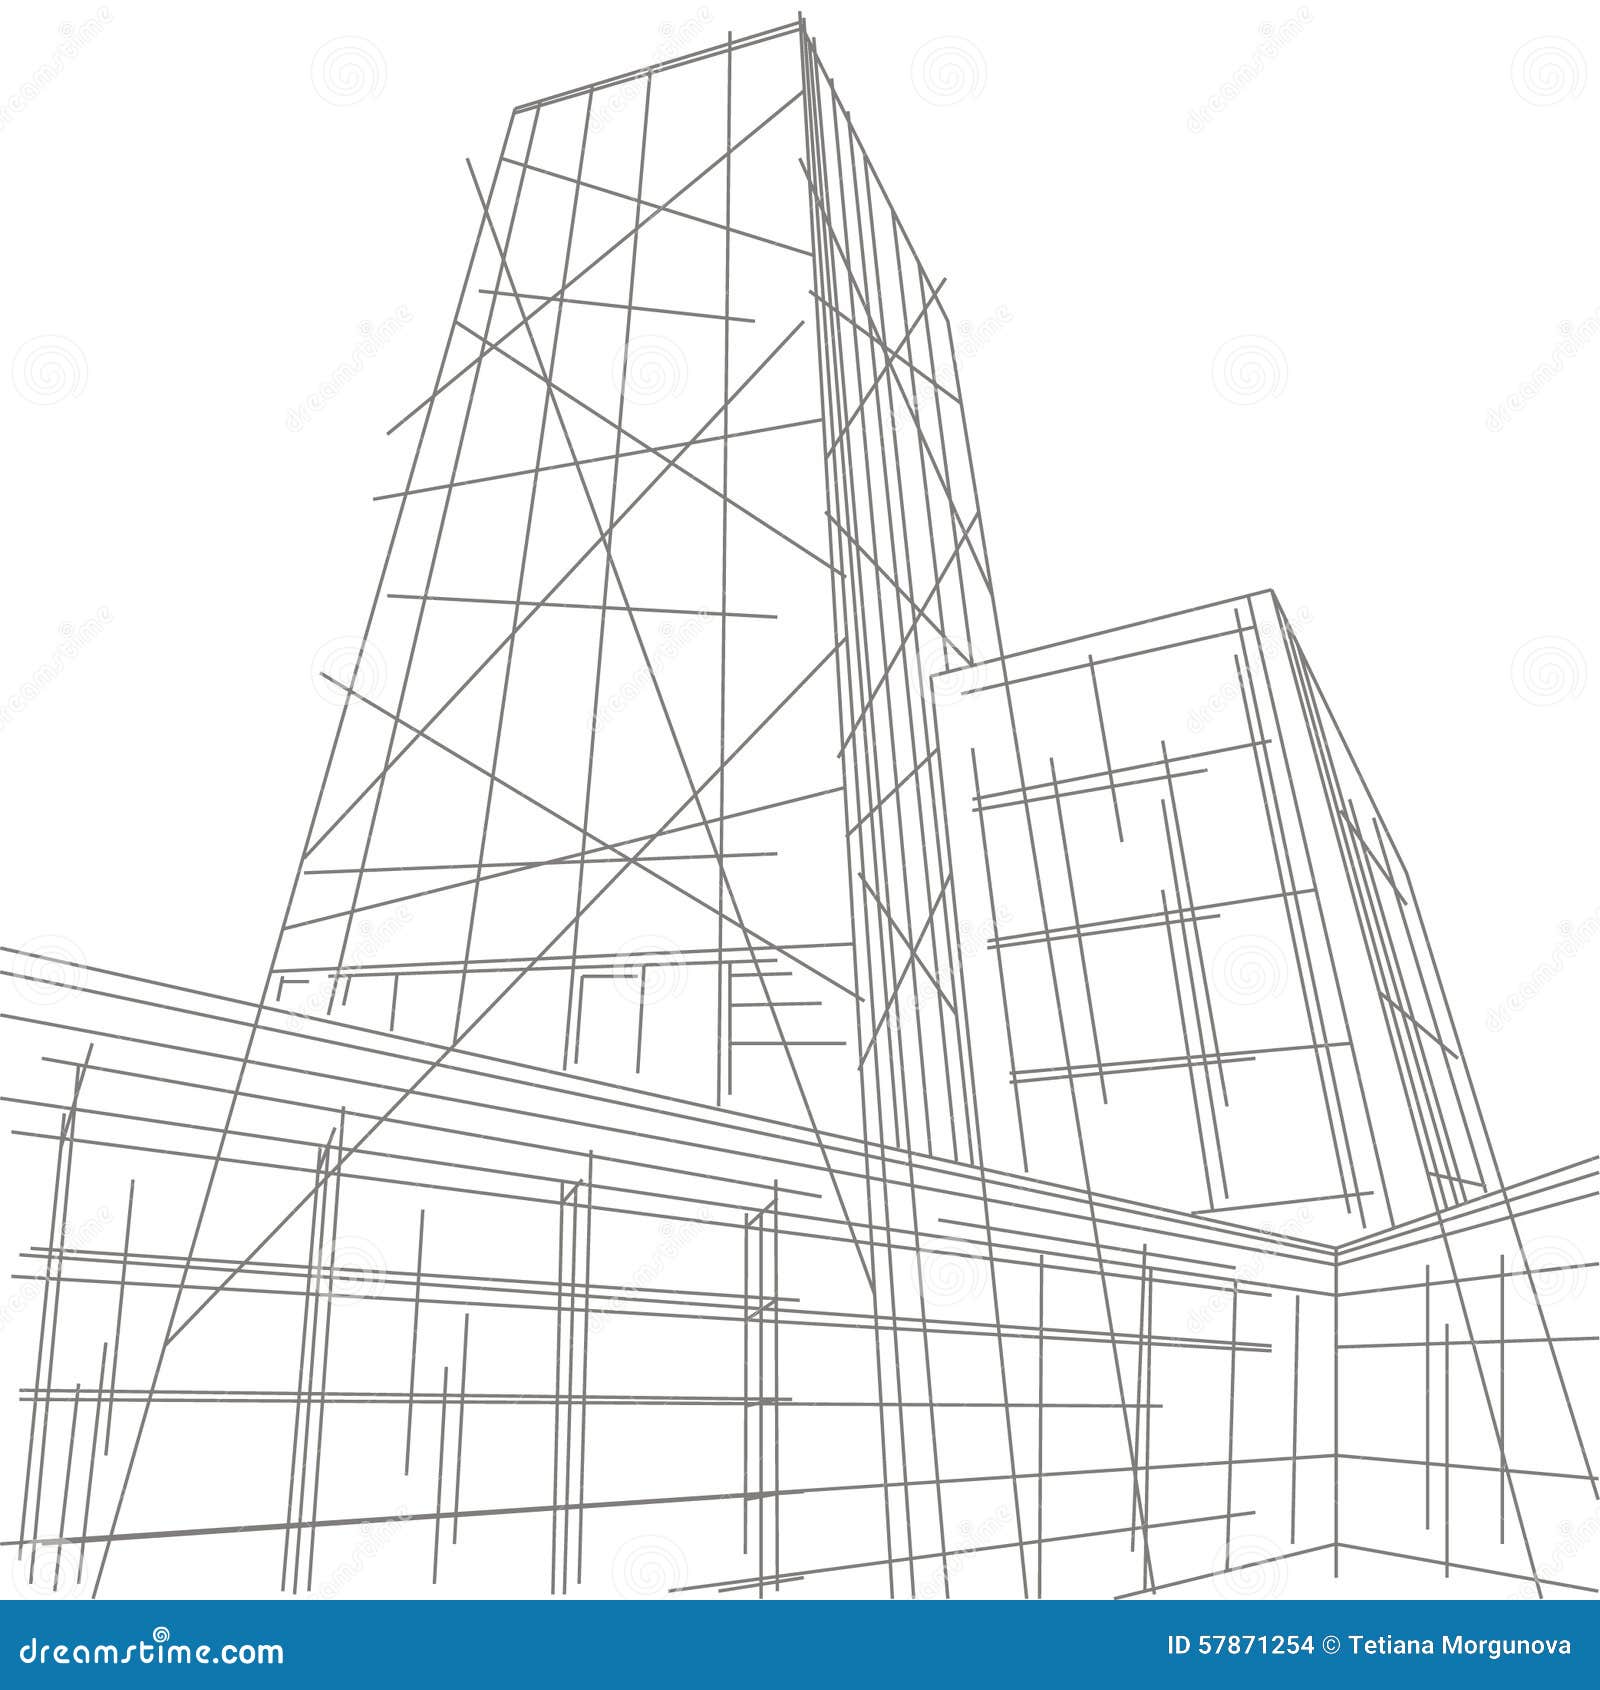 How to Draw a Skyscraper  Easy Drawing Tutorial For Kids